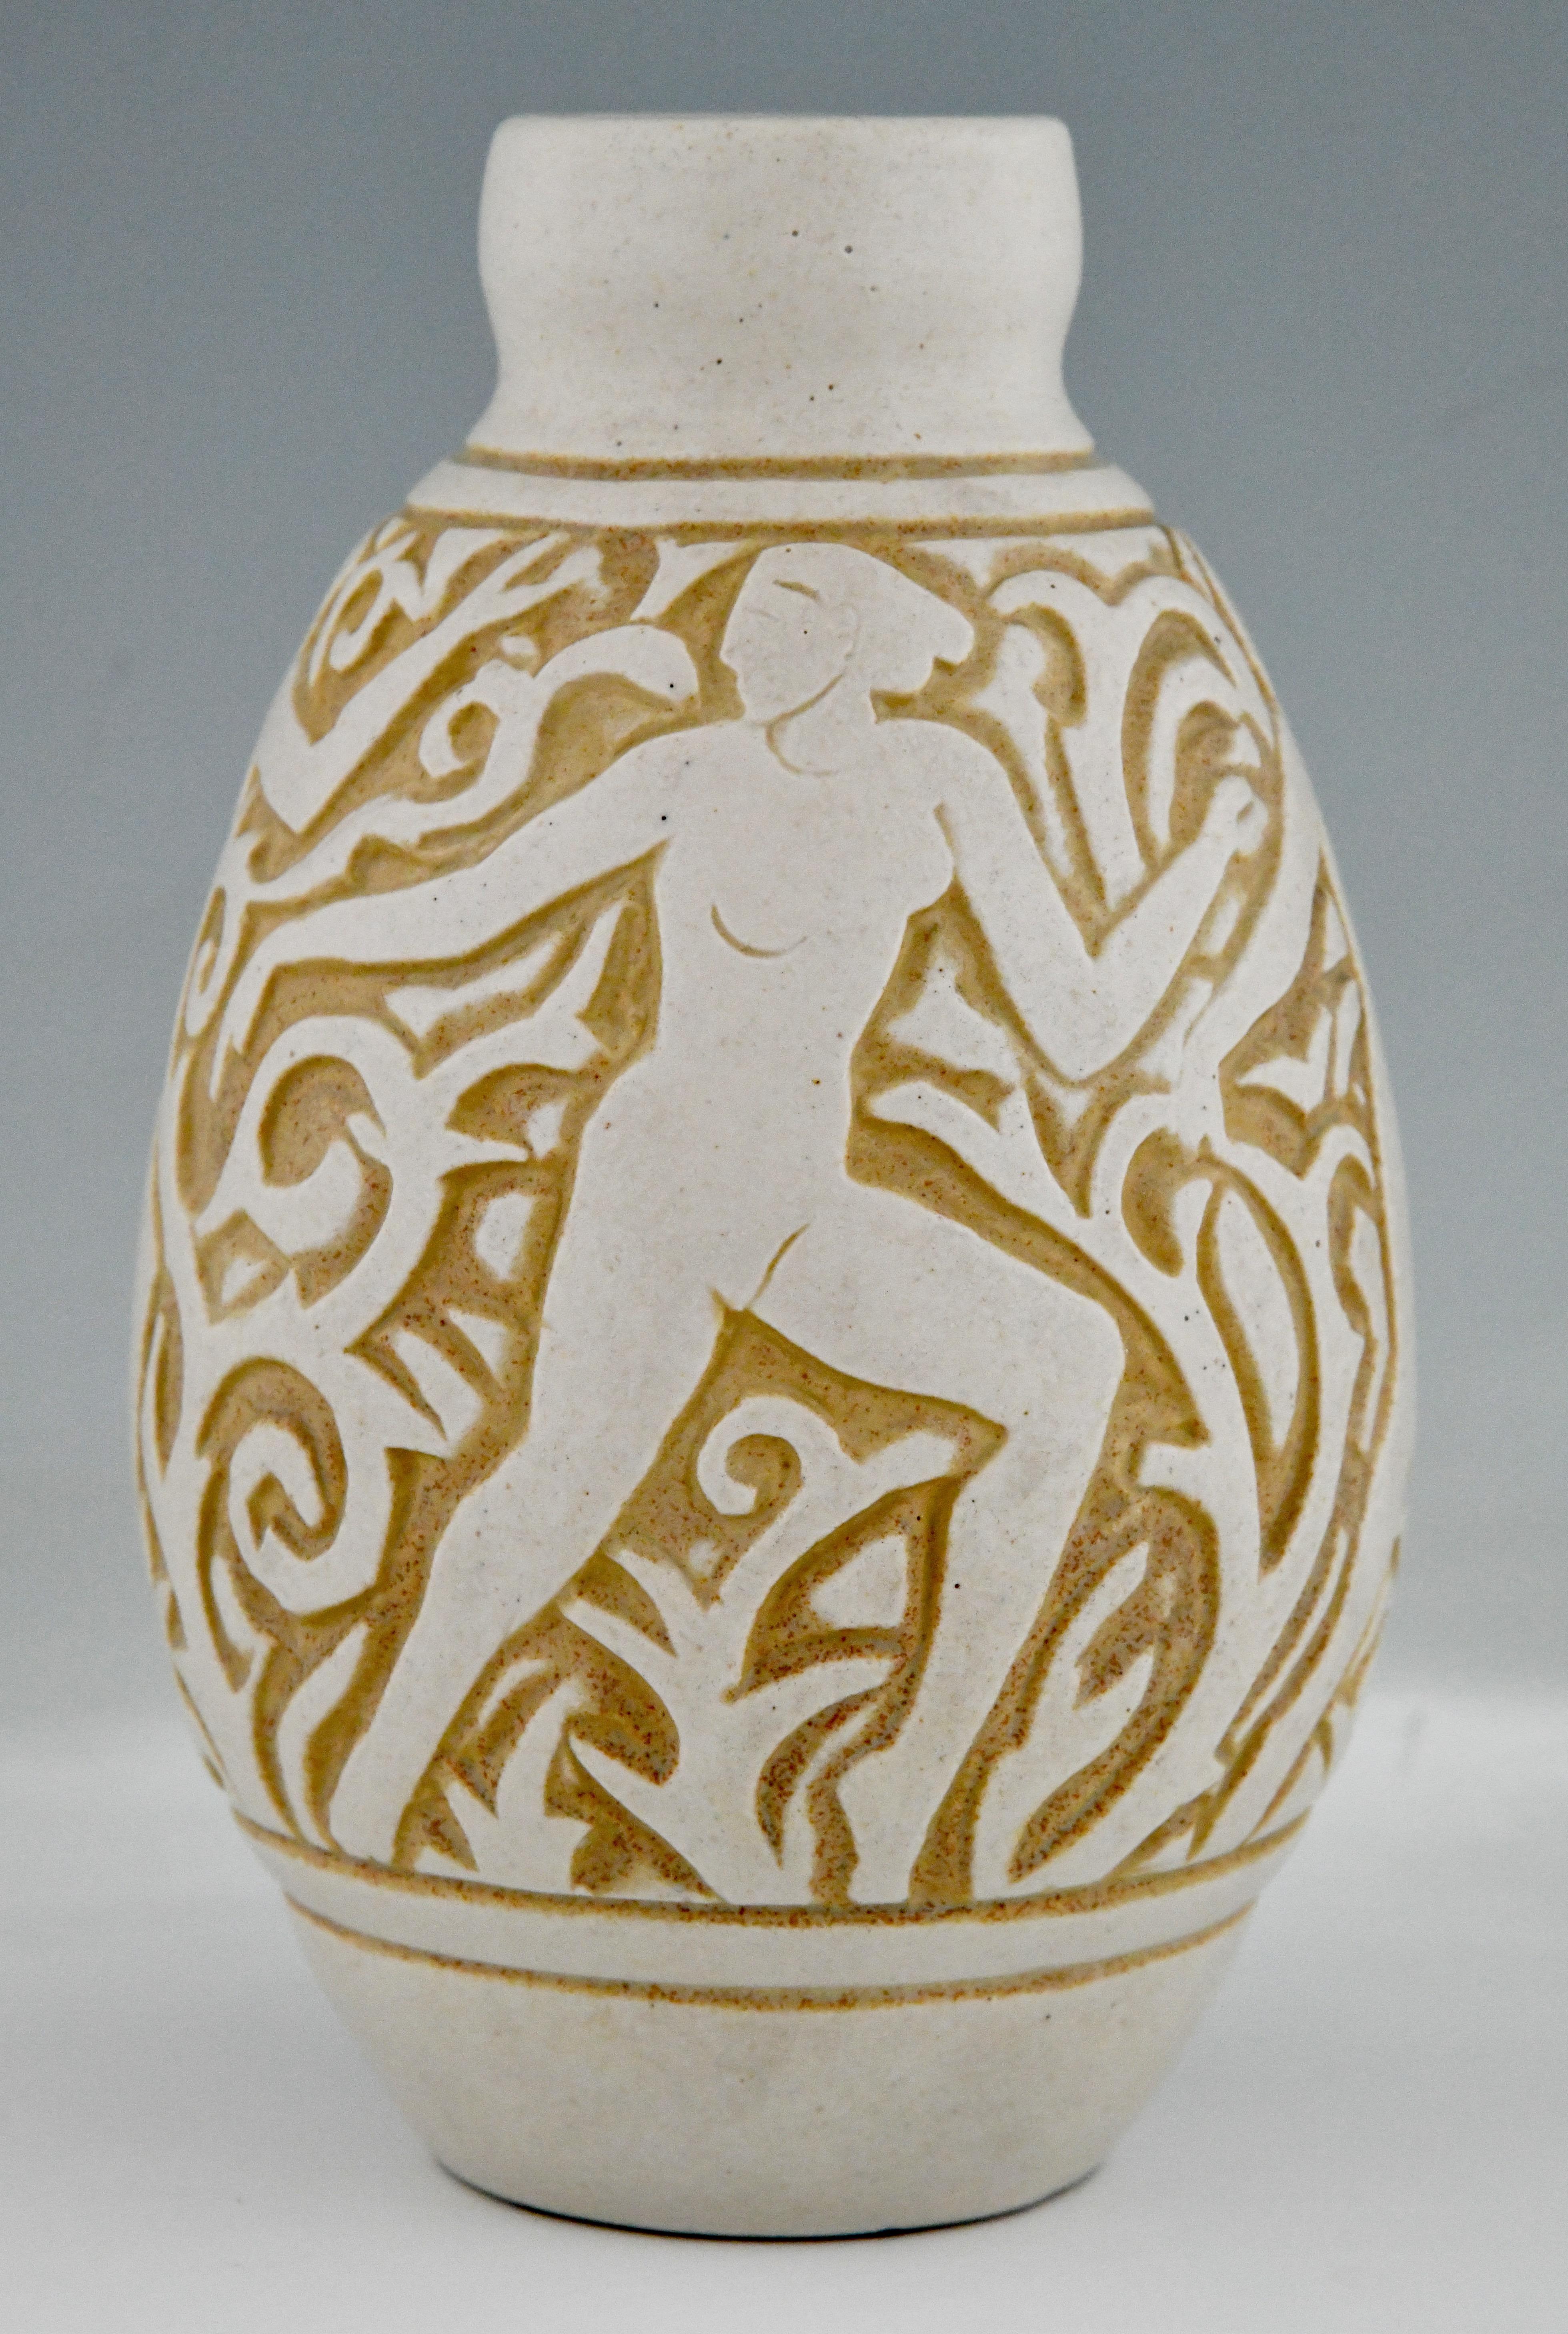 Art Deco ceramic vase with nudes by Mougin Frères design by Gaston Ventrillon or Ventrillon le Jeune. Grès Ceramic with incised decor of dancing nudes and art deco stylized foliage in the colors ivory and ochre yellow. France 1930.